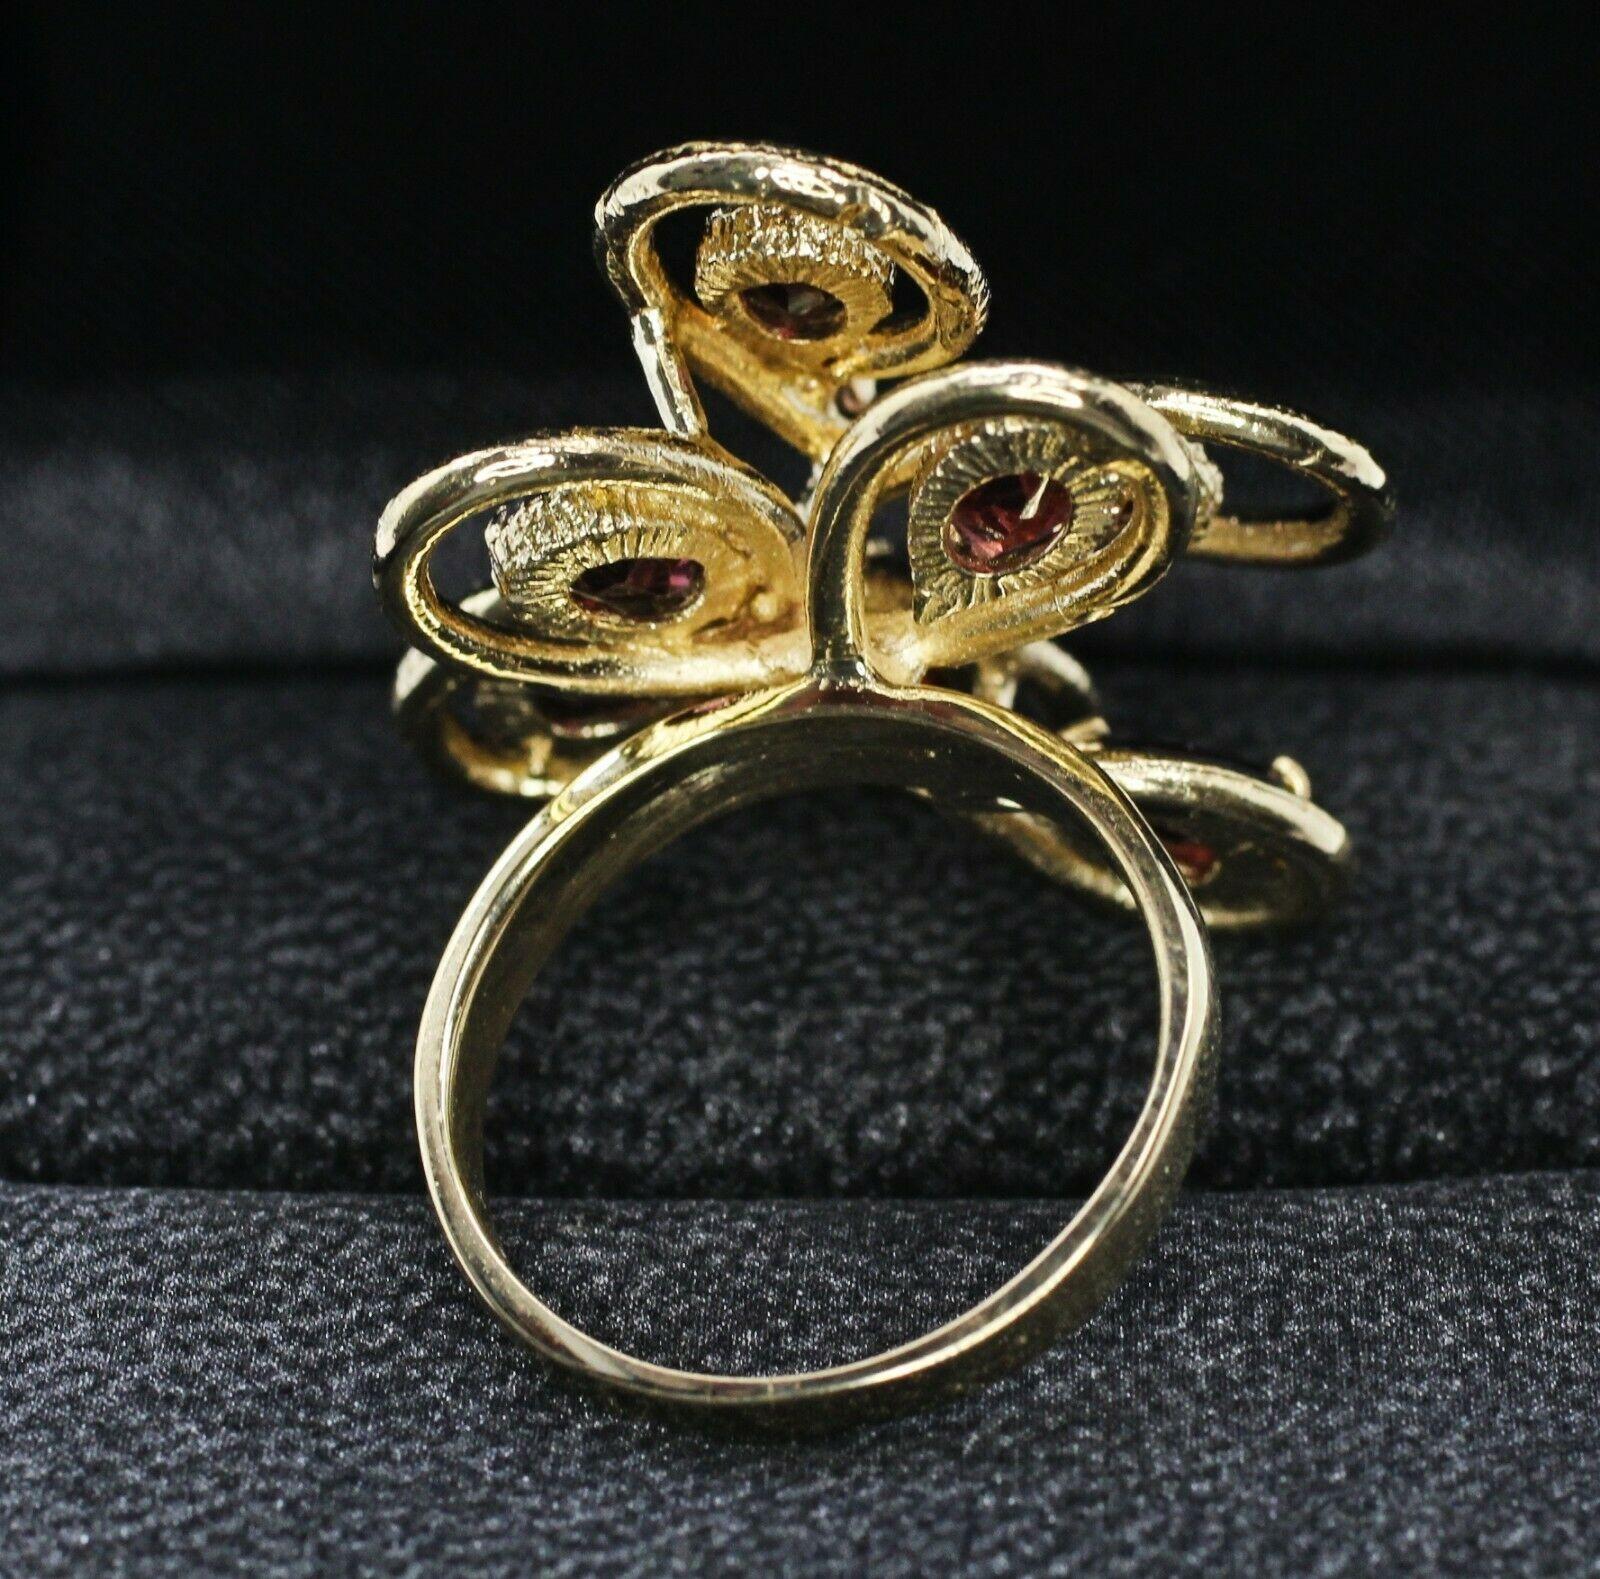  Product Details
    Metal: 14K YELLOW GOLD
    Measurements :
        Width/Lenght: 1'INCH EACH SIDES
        Thickness: 9.05 mm
Specifications:
    main stone: 7PCS PS GARNET APPROX 6.01MM-4.03mM
    additional: ROUND CUT DIAMOND
    diamonds: 1